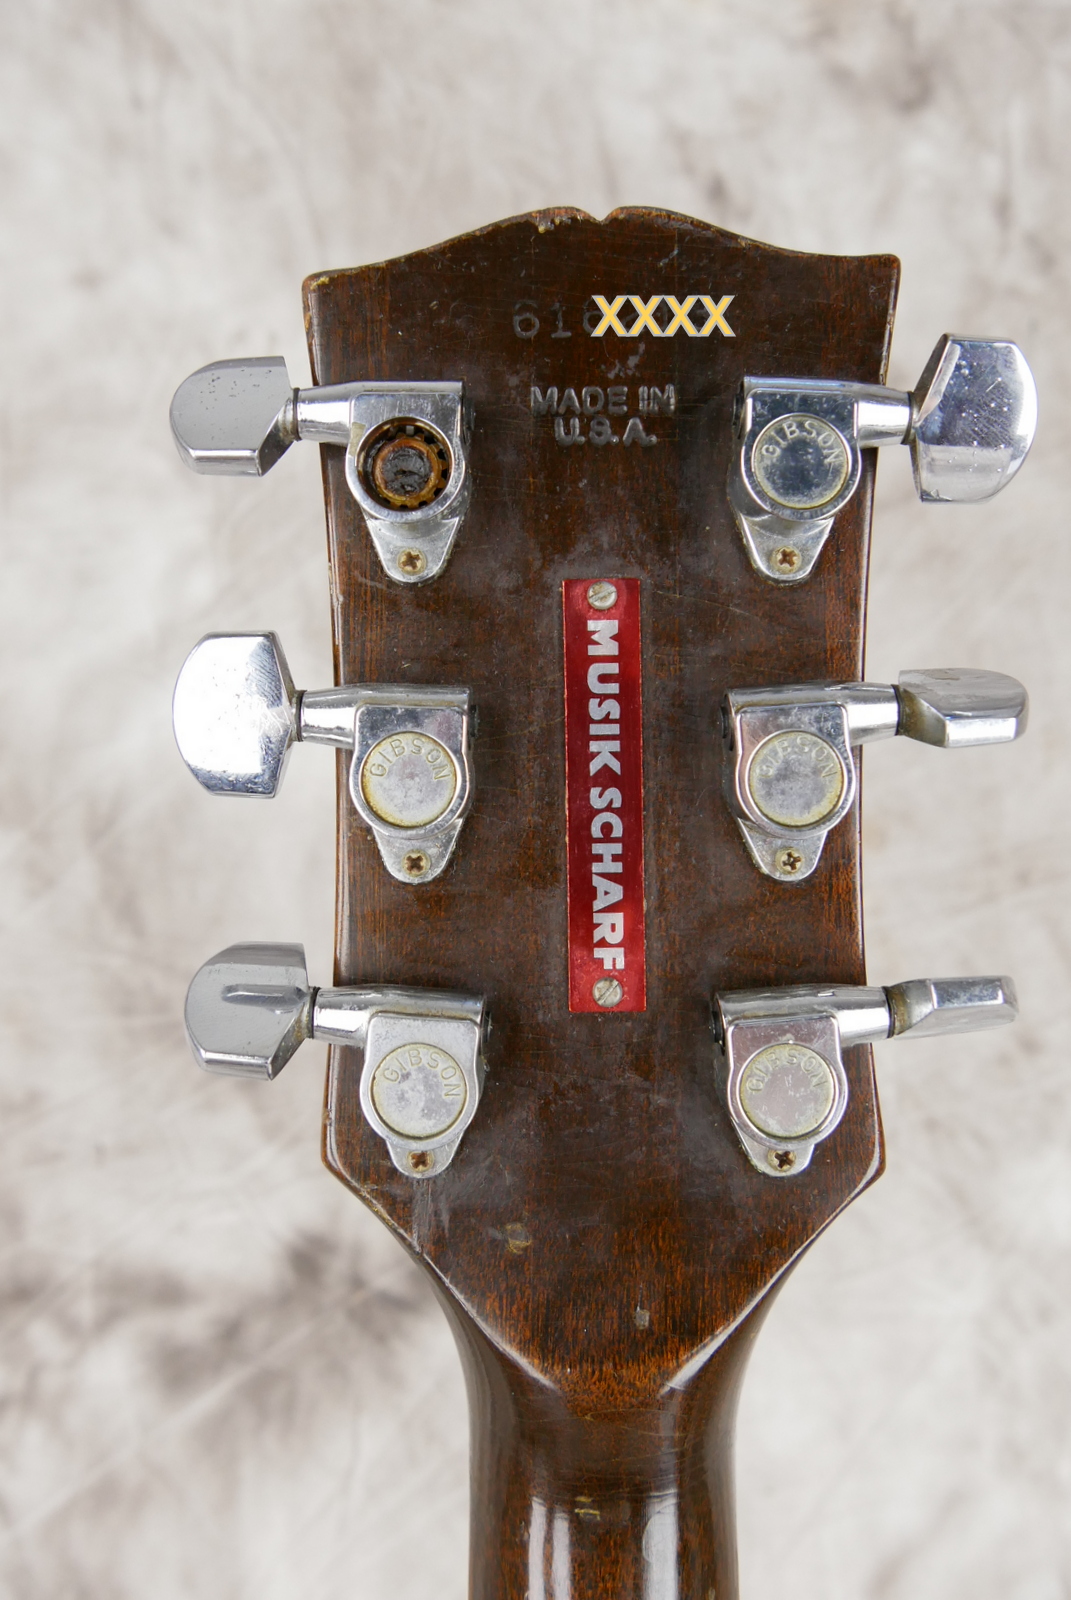 Gibson_SG_Deluxe_bigsby_1971_1972_walnut_cts-pots_1966-004.JPG